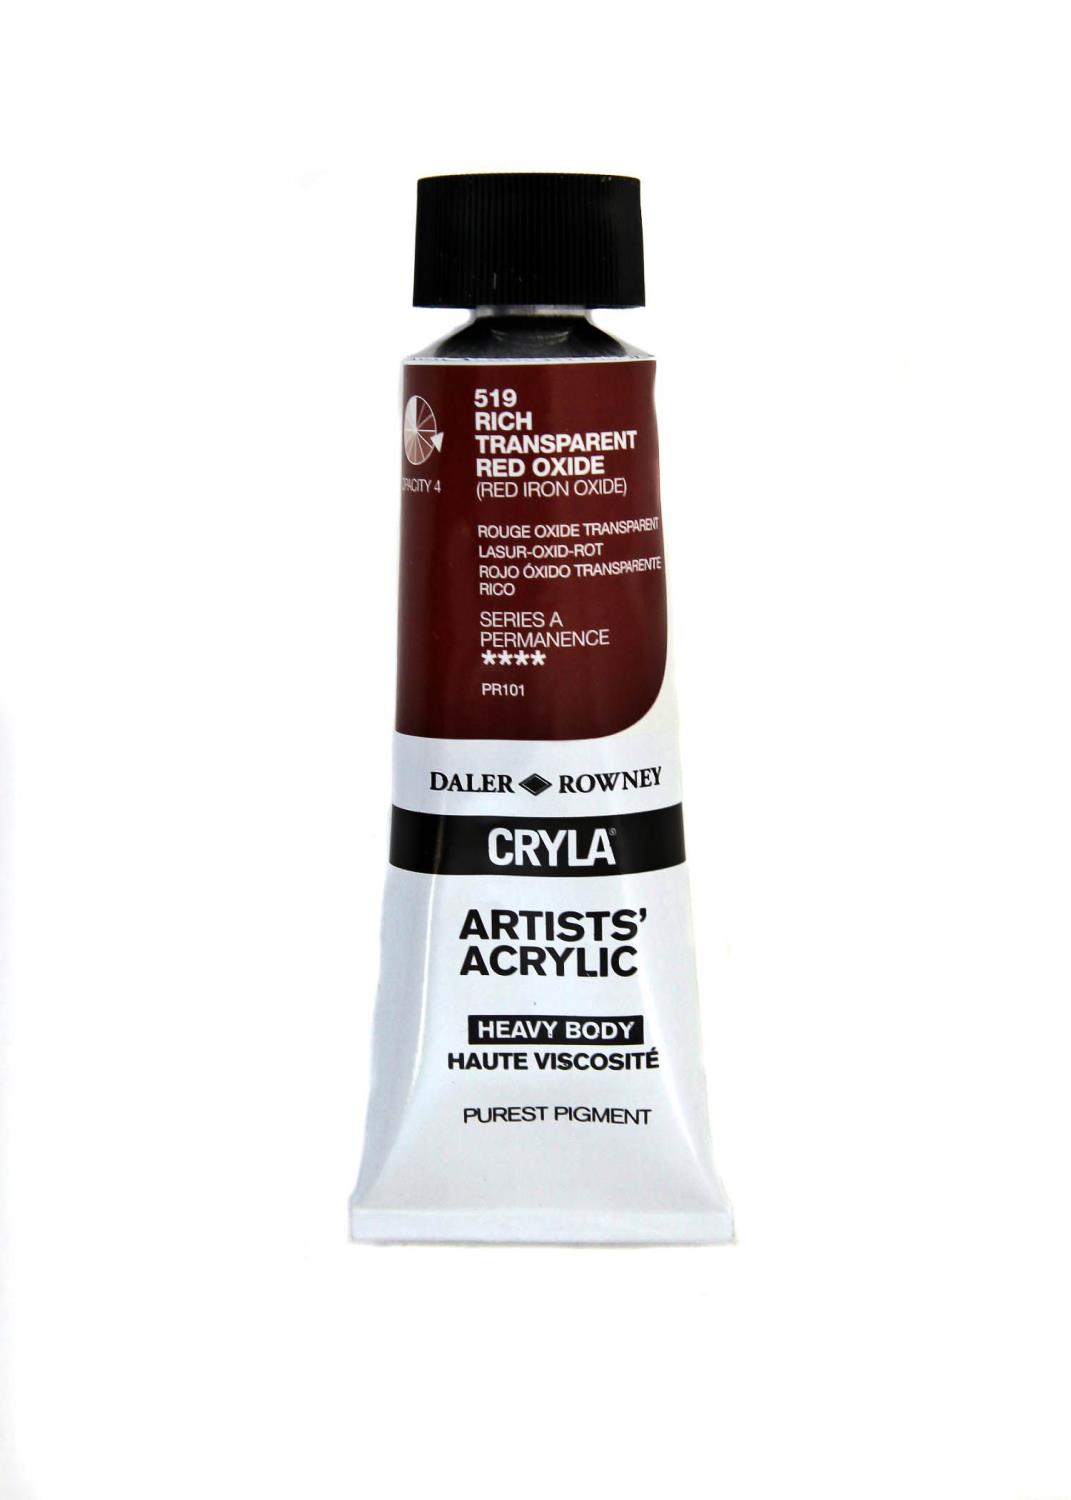 Daler Rowney Cryla 75ml 519 Rich Transparent Red Oxide Serie A